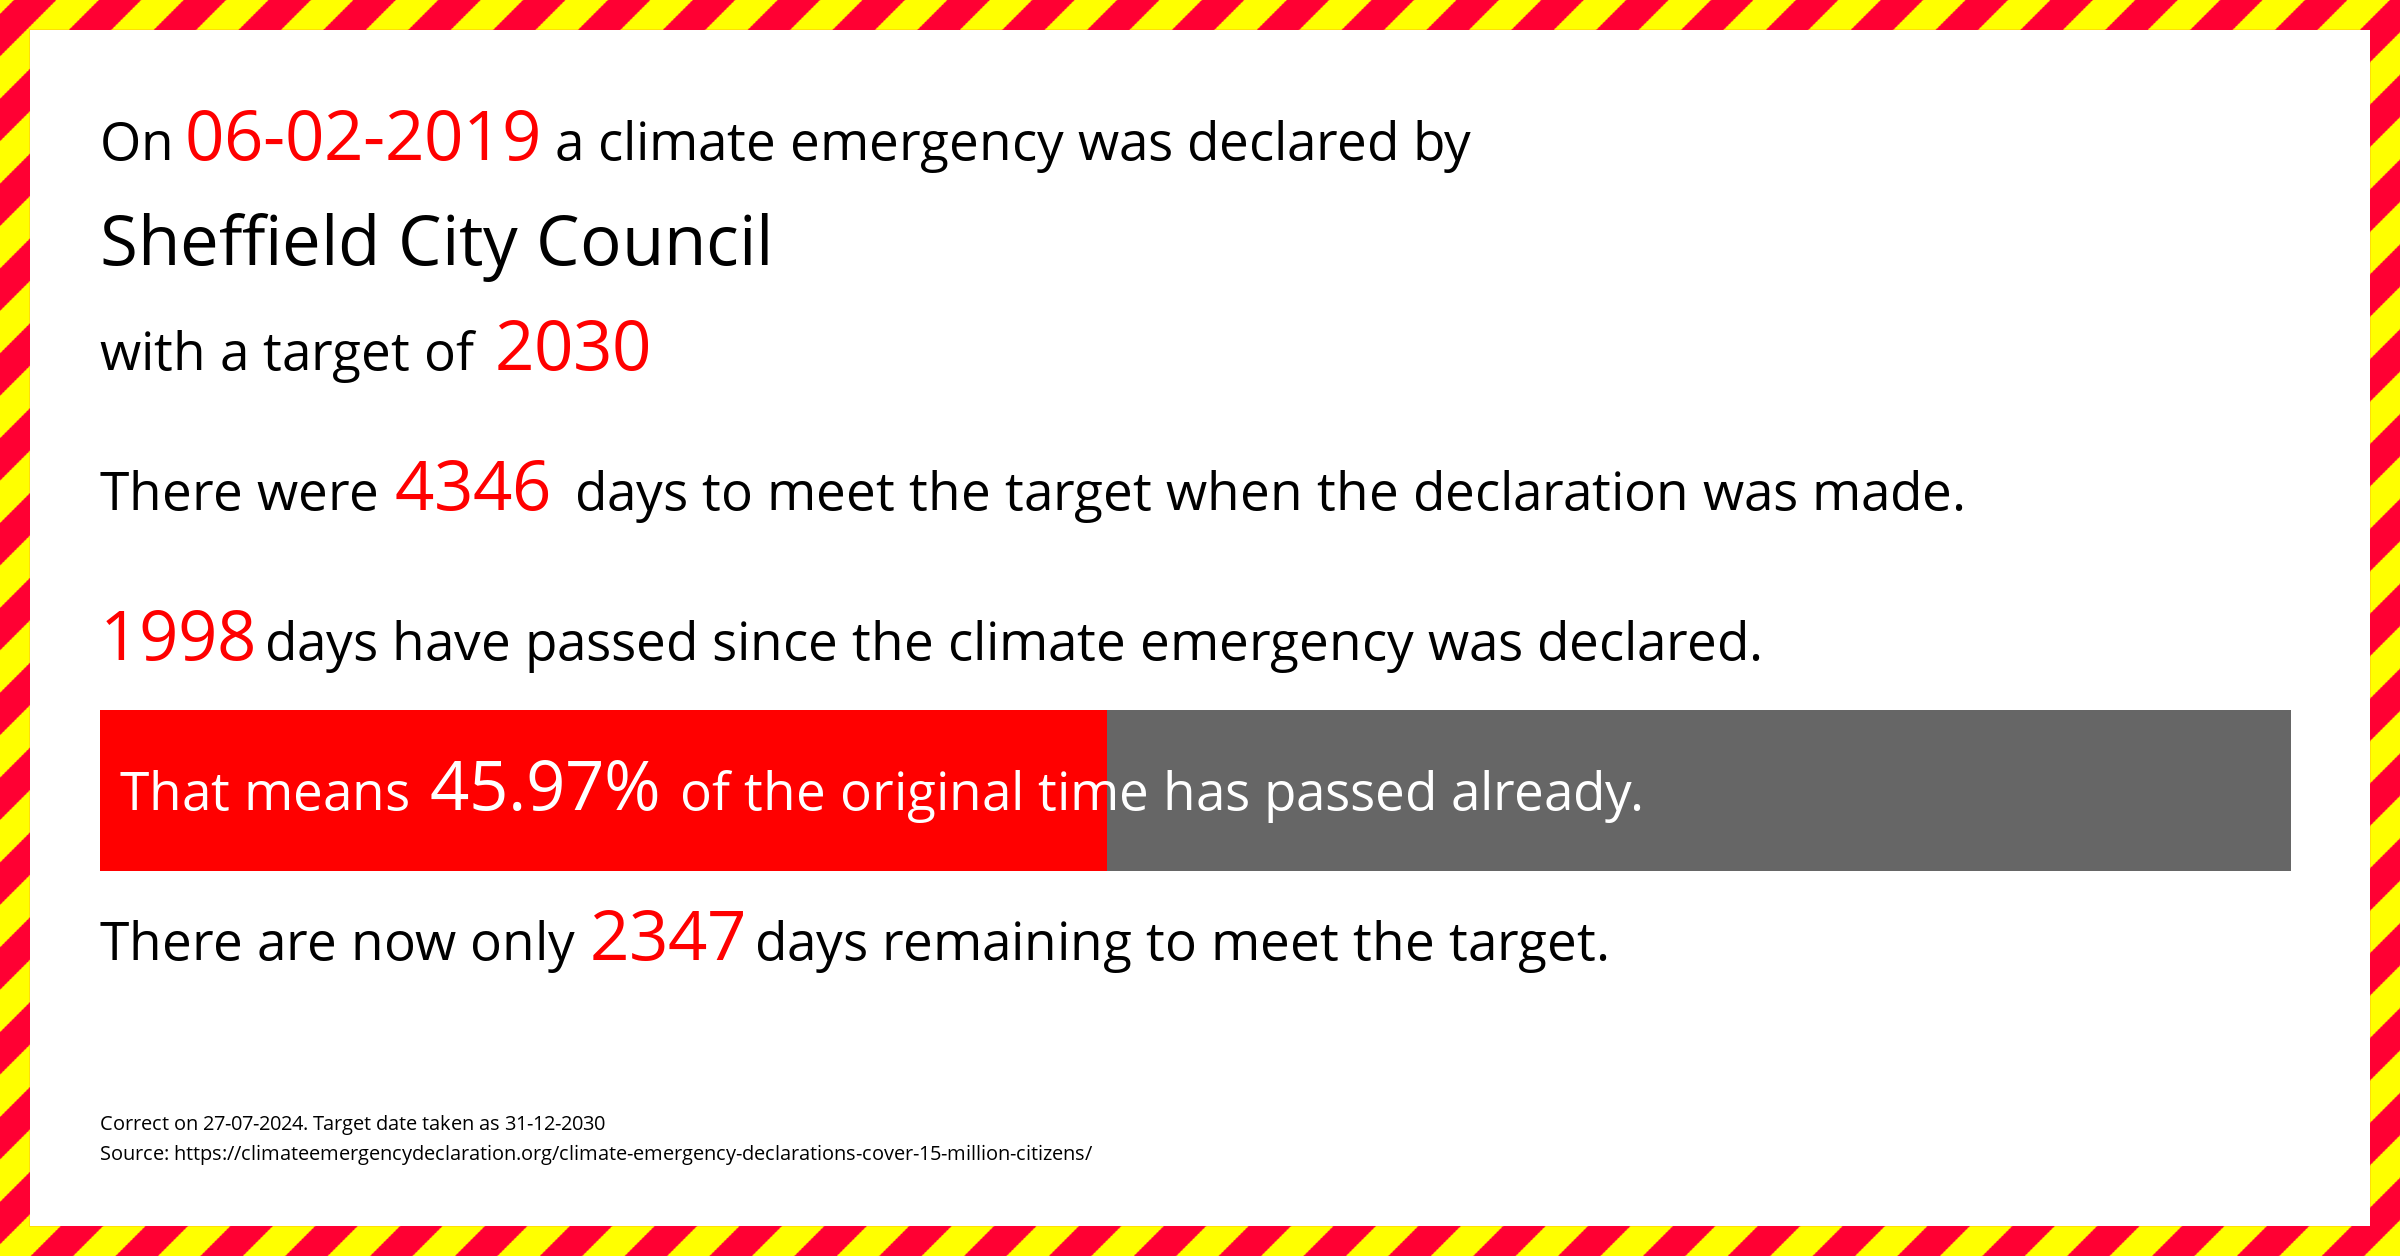 Sheffield City Council declared a Climate emergency on Wednesday 6th February 2019, with a target of 2030.